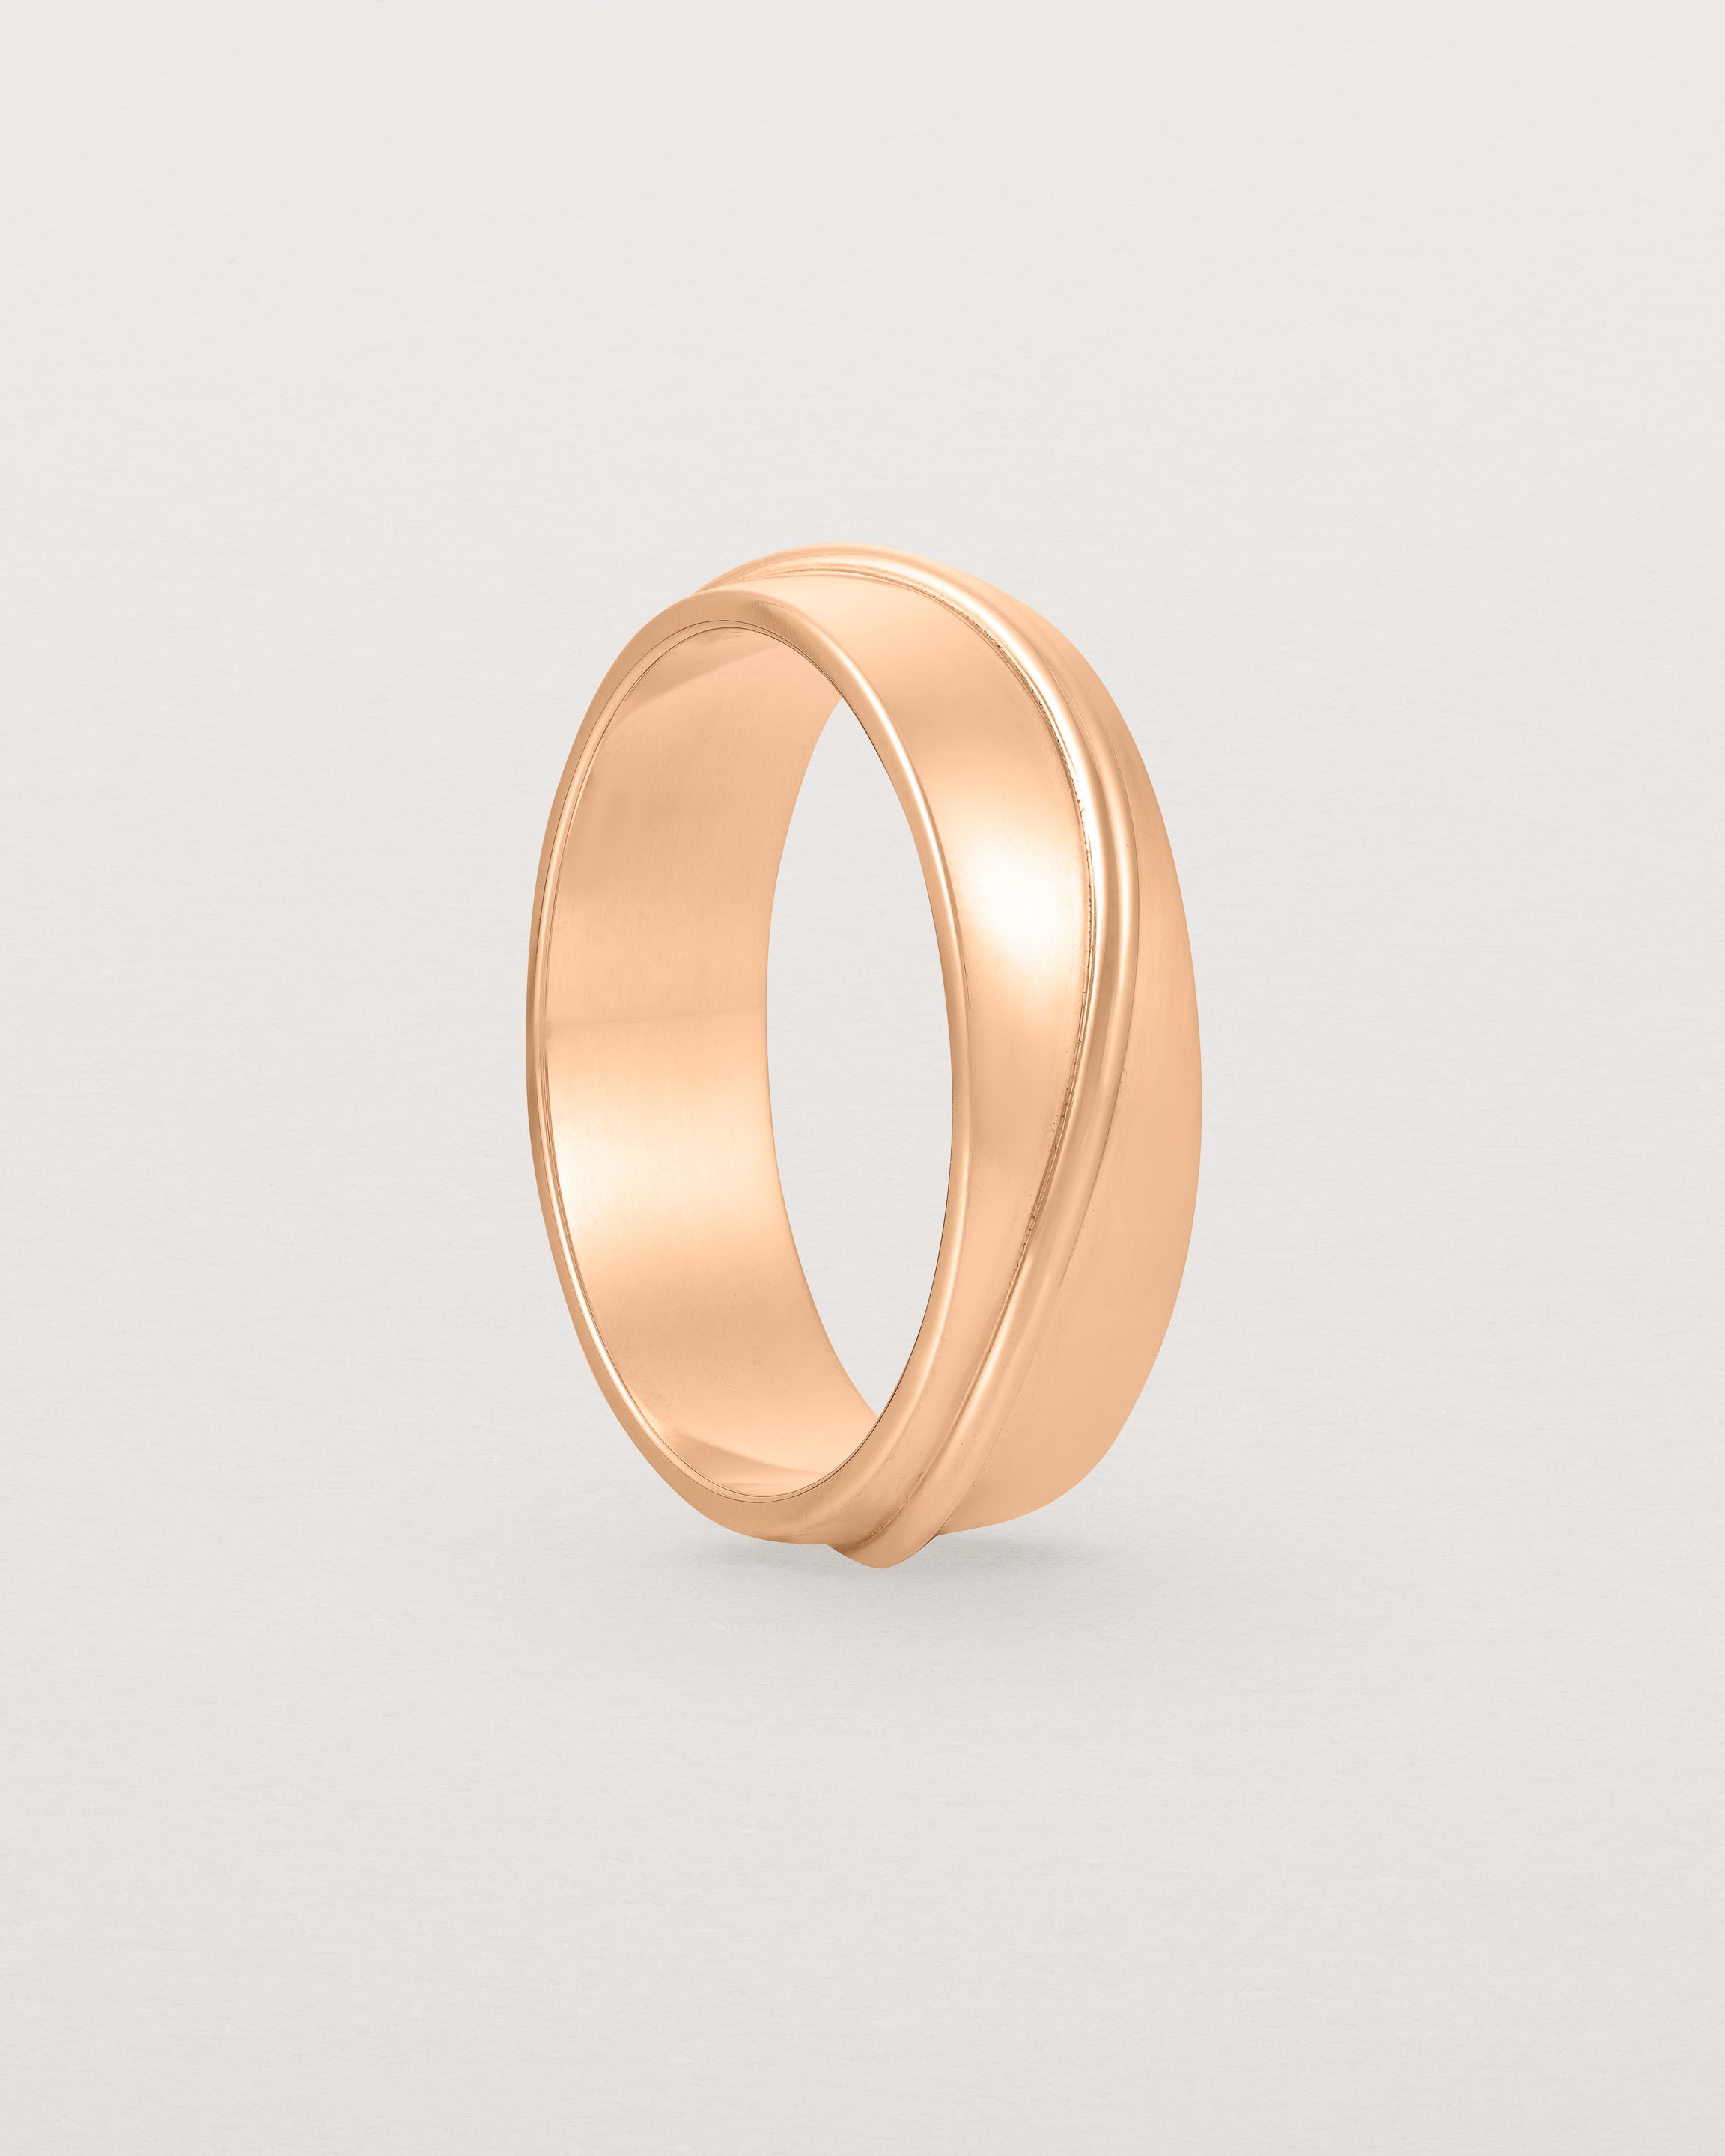 Standing view of the Surge Wedding Ring | 6mm | Rose Gold.